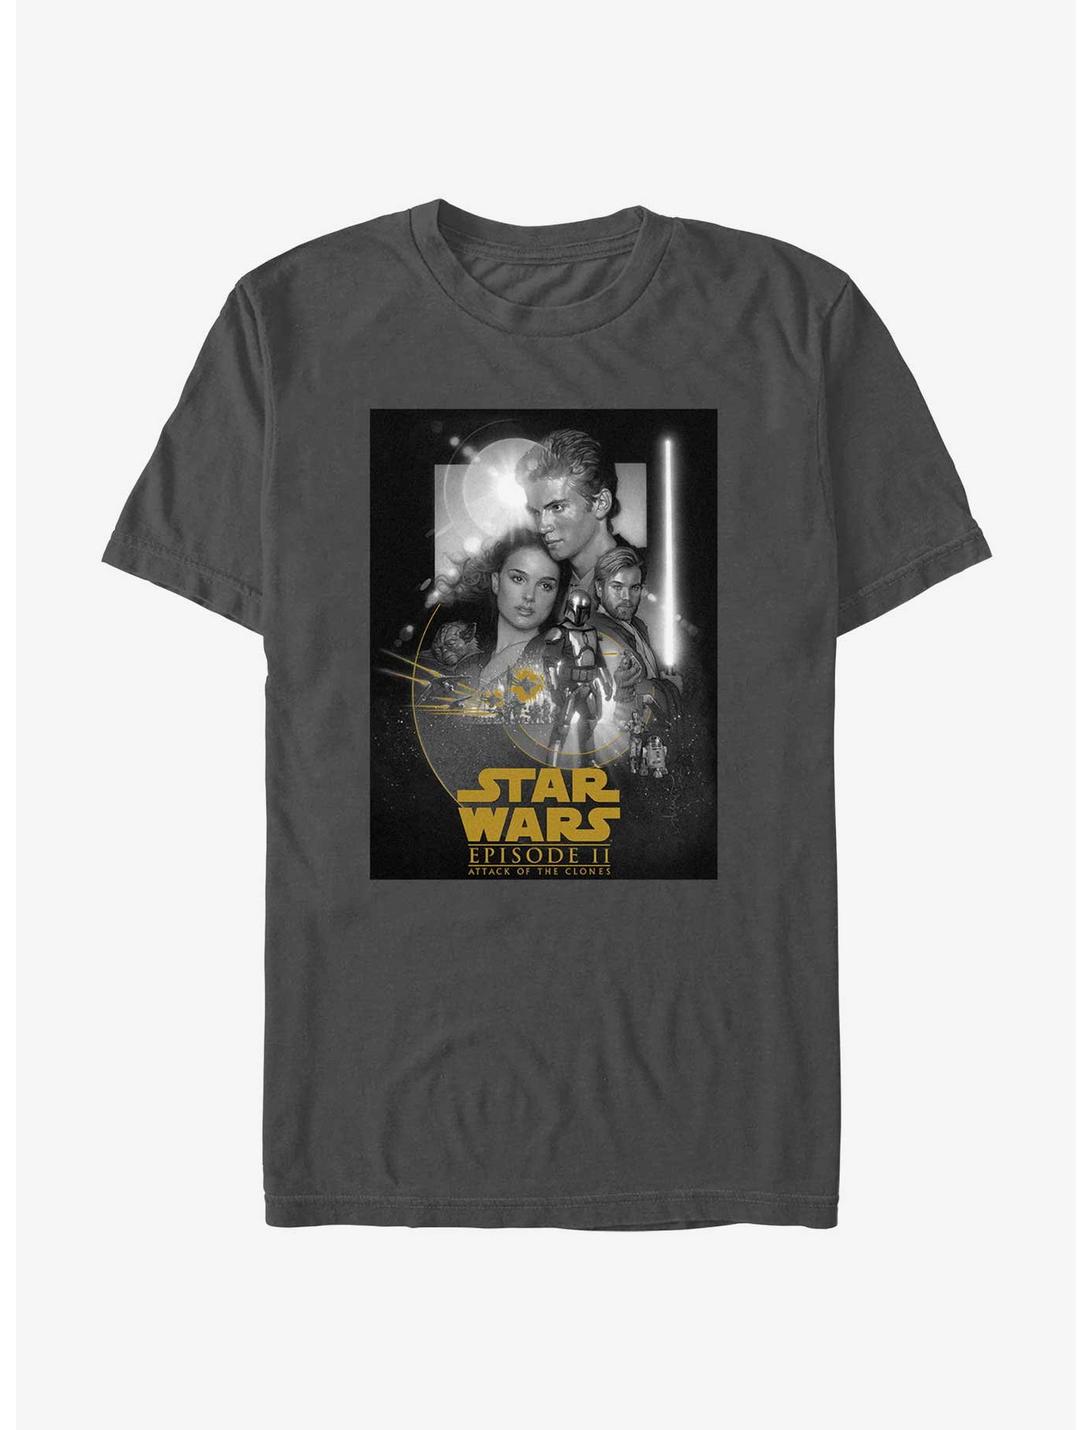 Star Wars Episode II: Attack Of The Clones Poster T-Shirt, CHARCOAL, hi-res